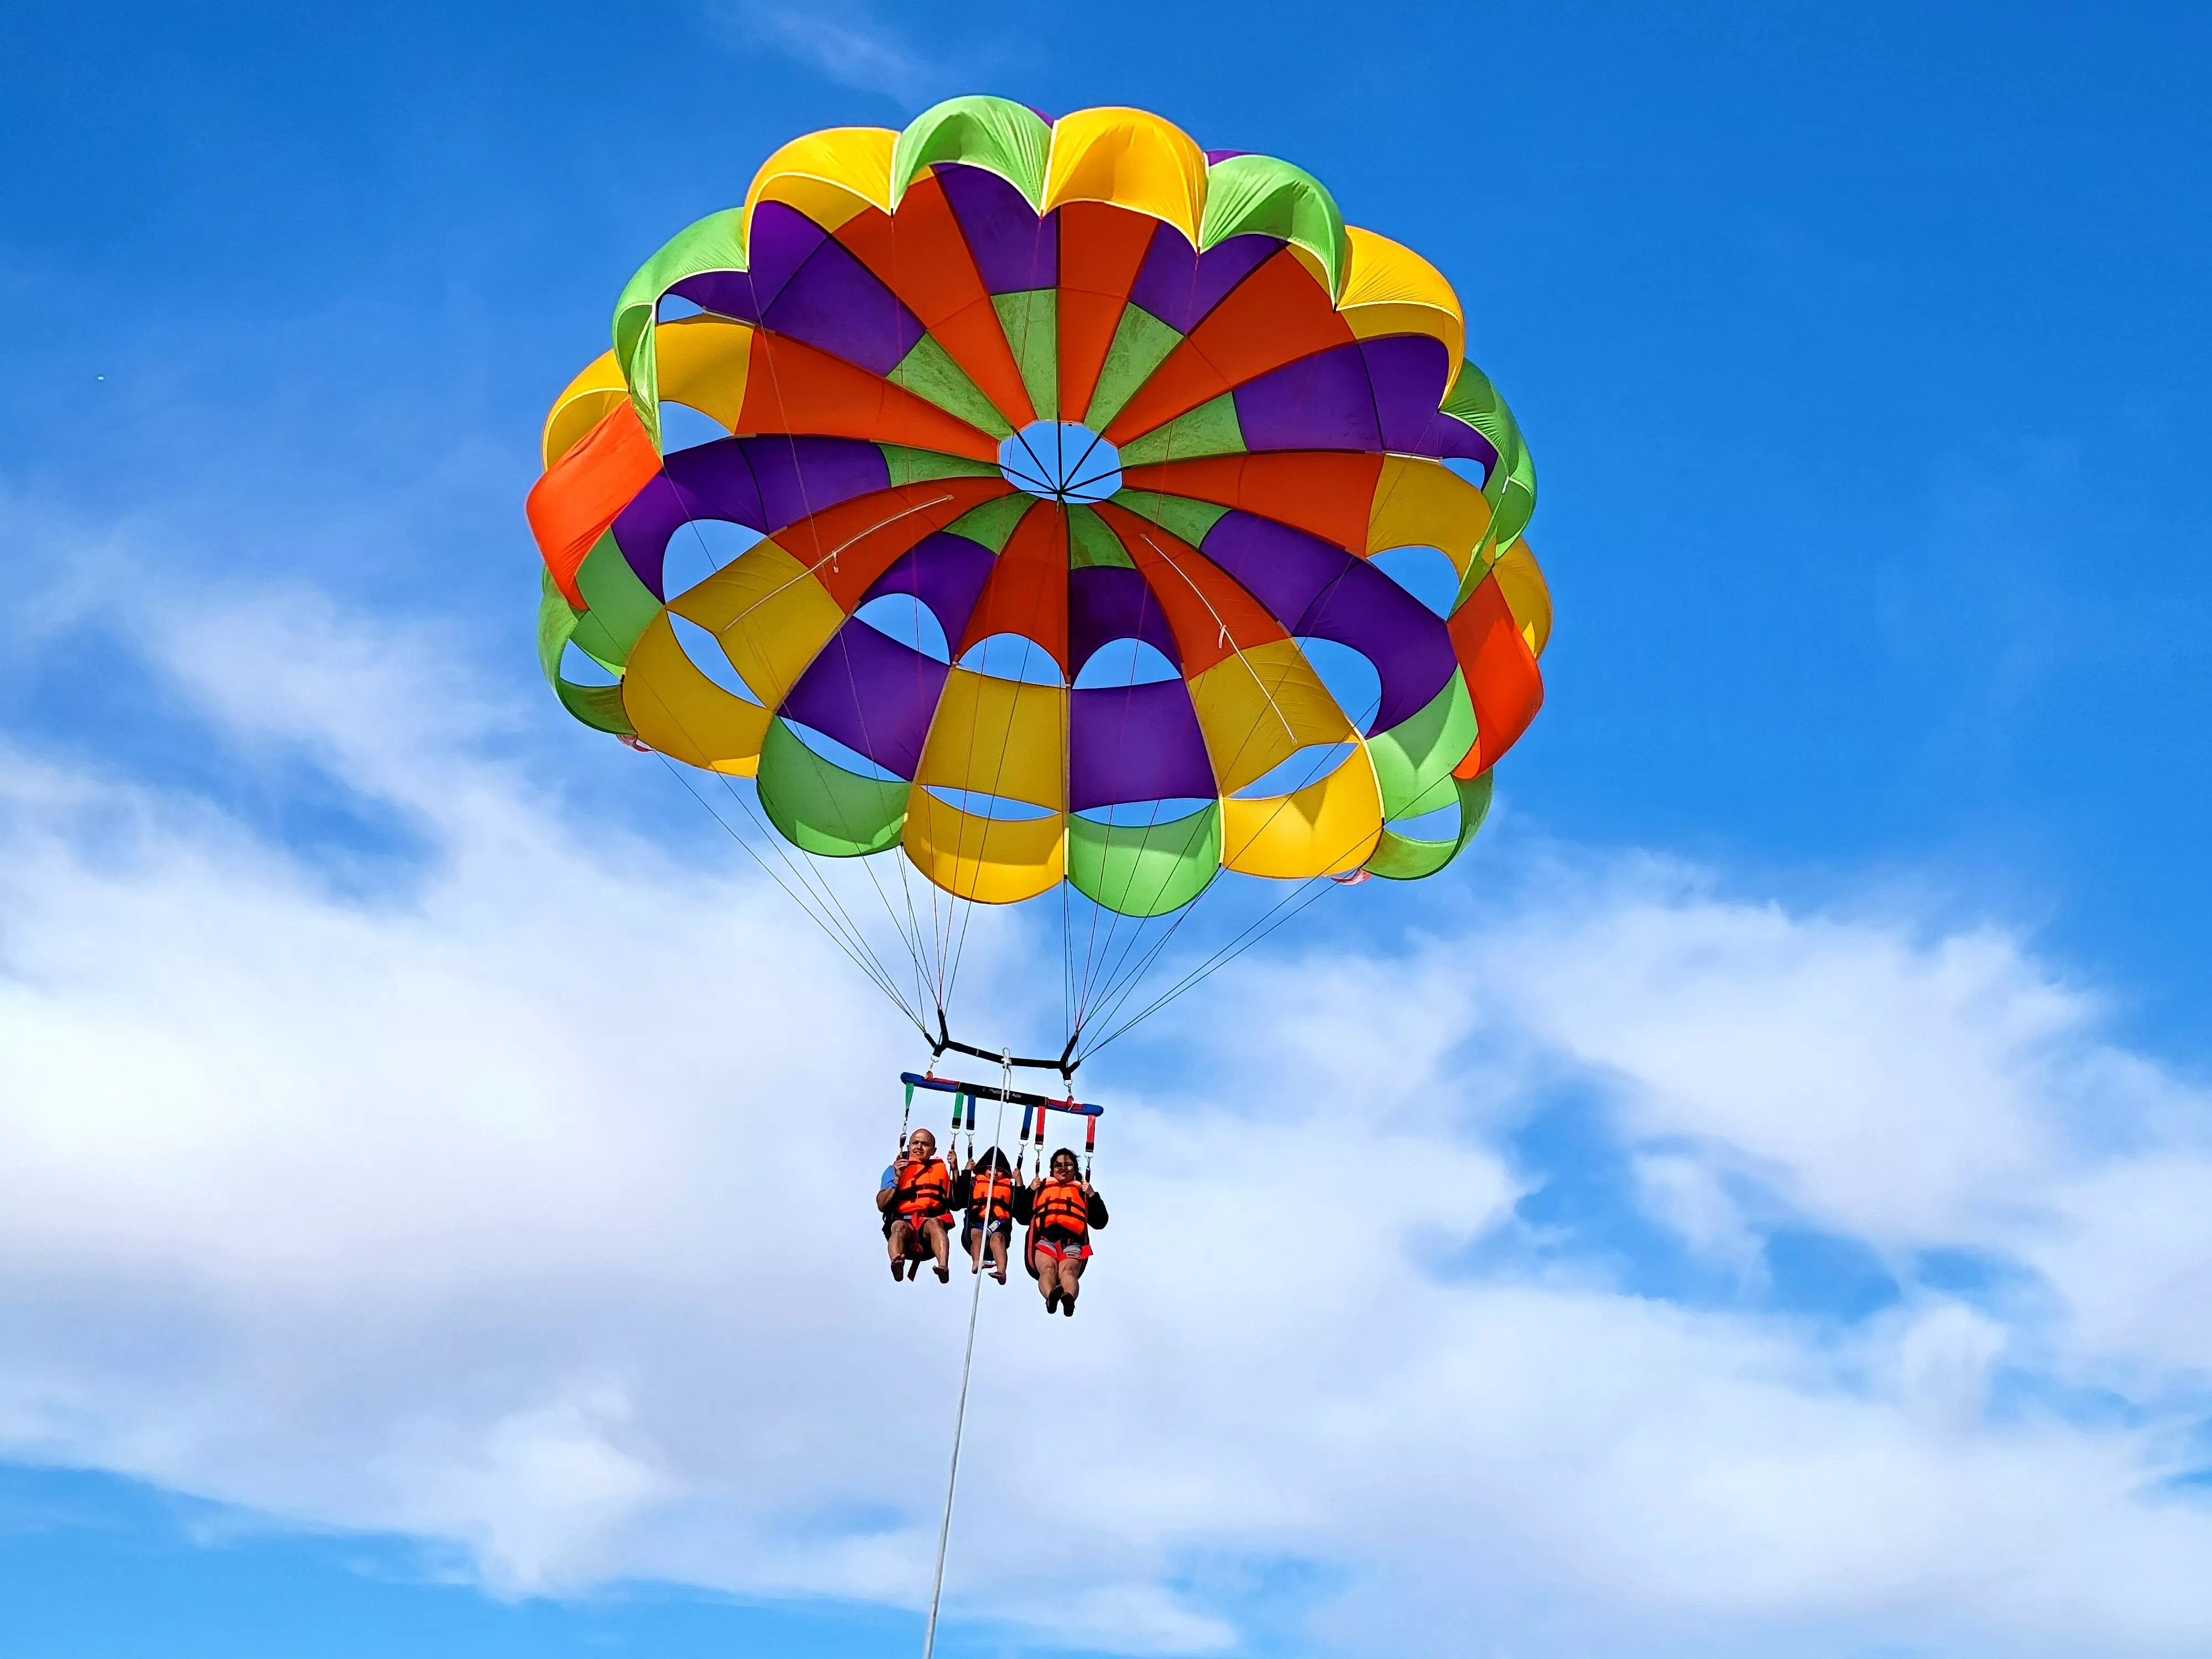 Parasailing Adventures Lake George in USA, North America | Parasailing - Rated 4.2